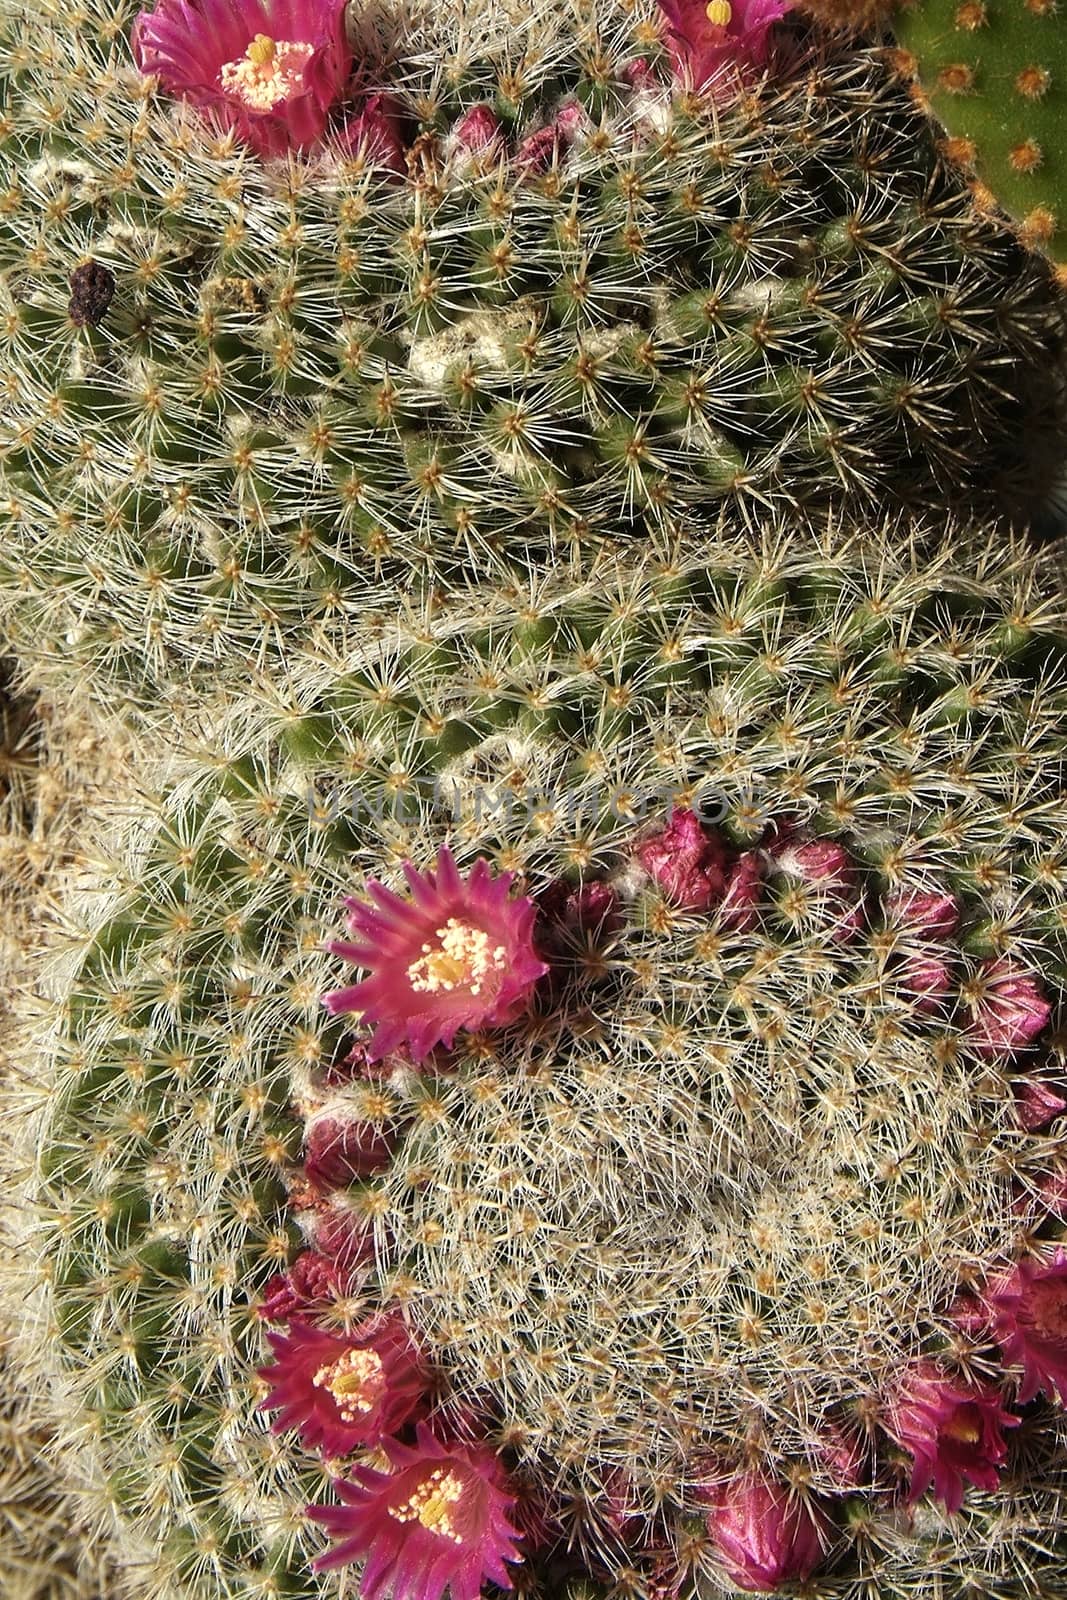 Cactus planted in a garden, full of flowers